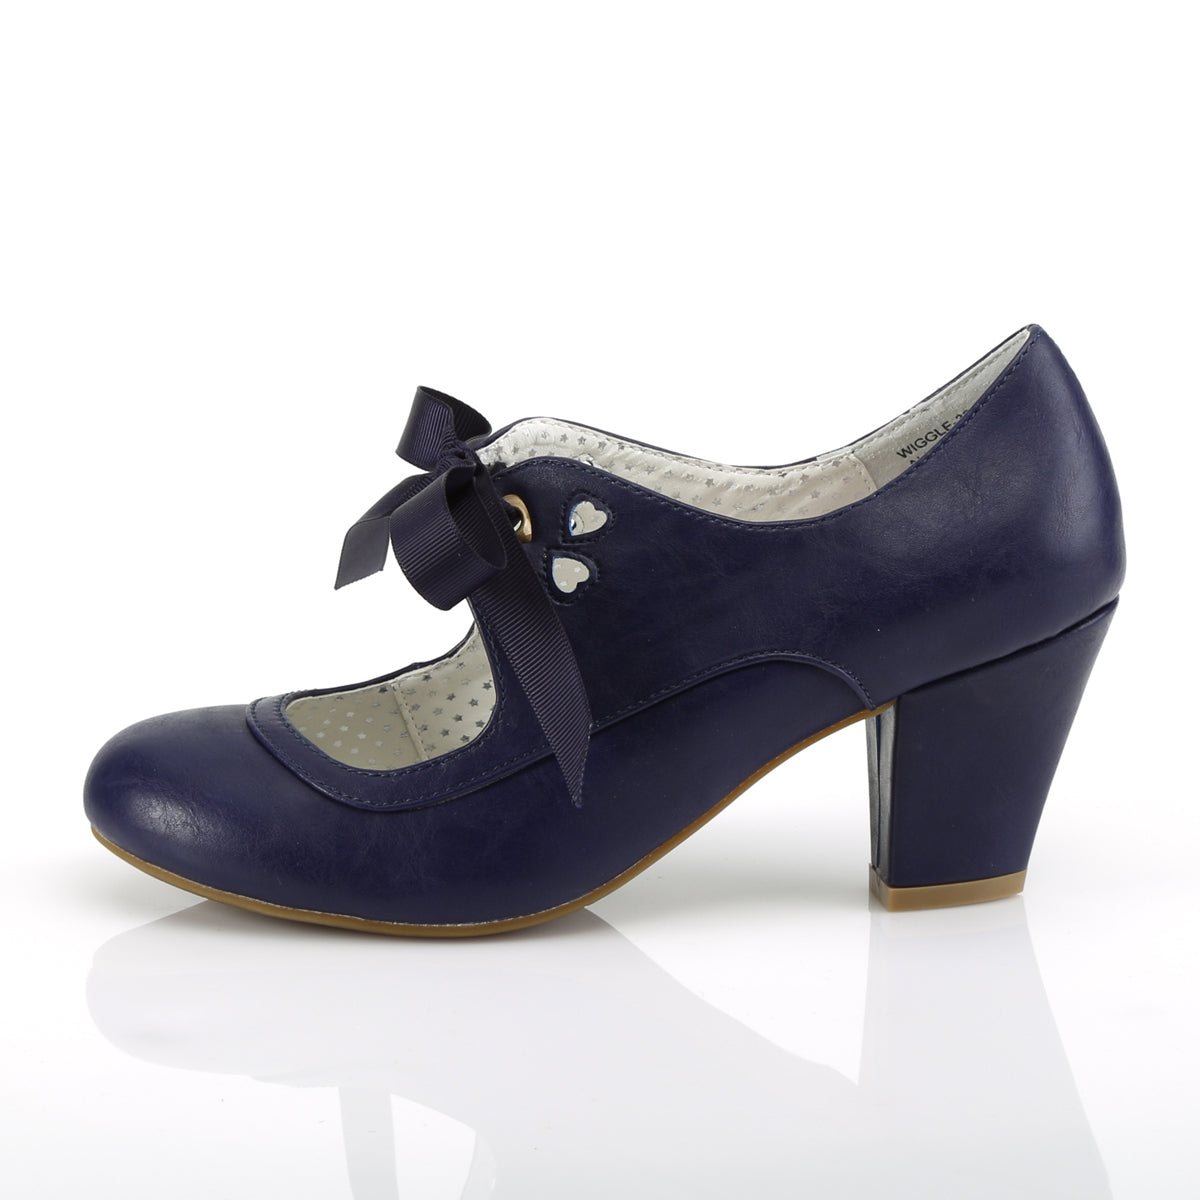 Wiggle Mary Jane Pumps Navy Blue